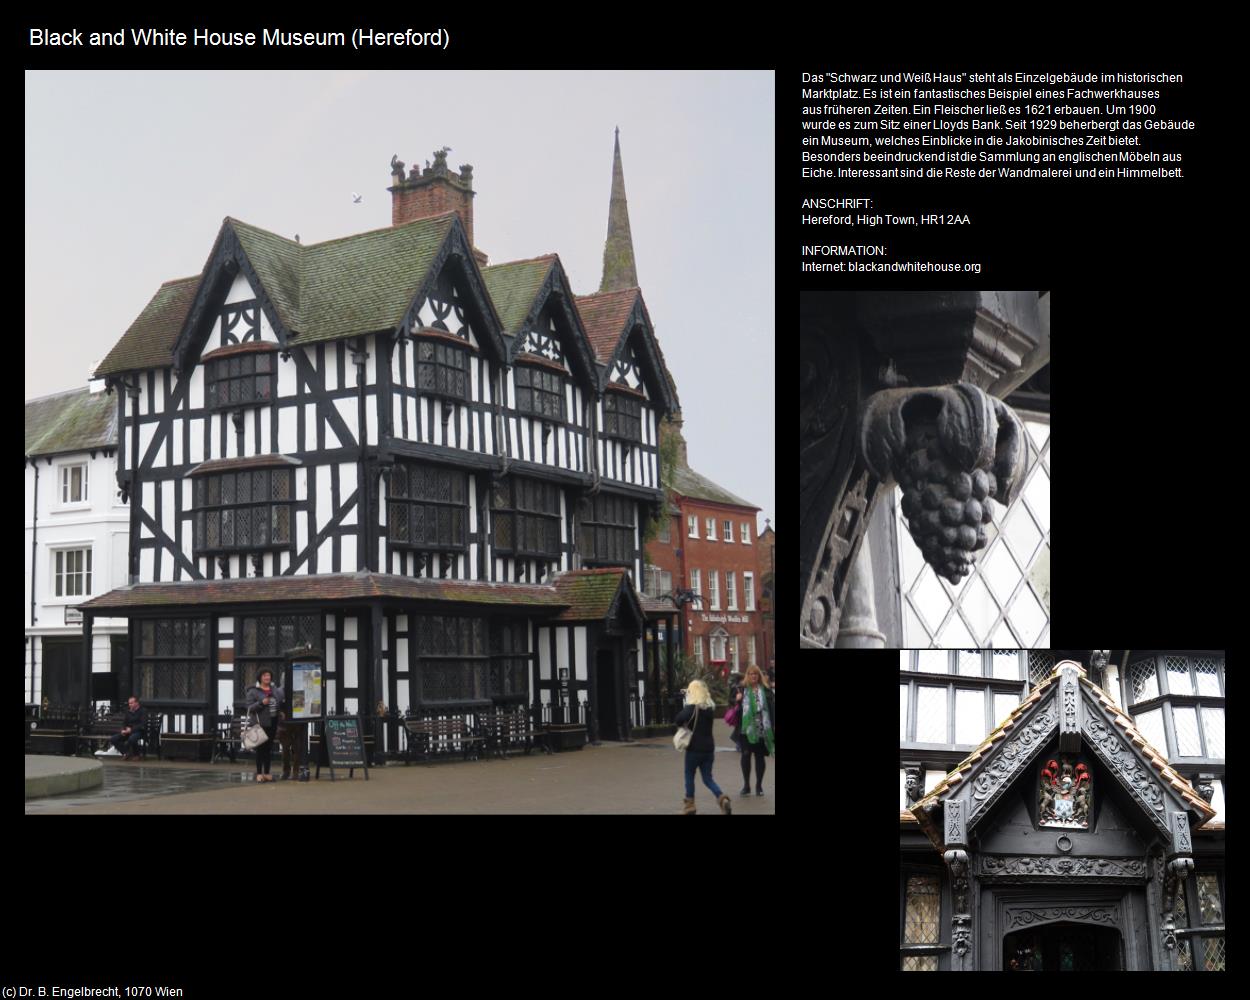 Black and White House Museum (Hereford, England) in Kulturatlas-ENGLAND und WALES